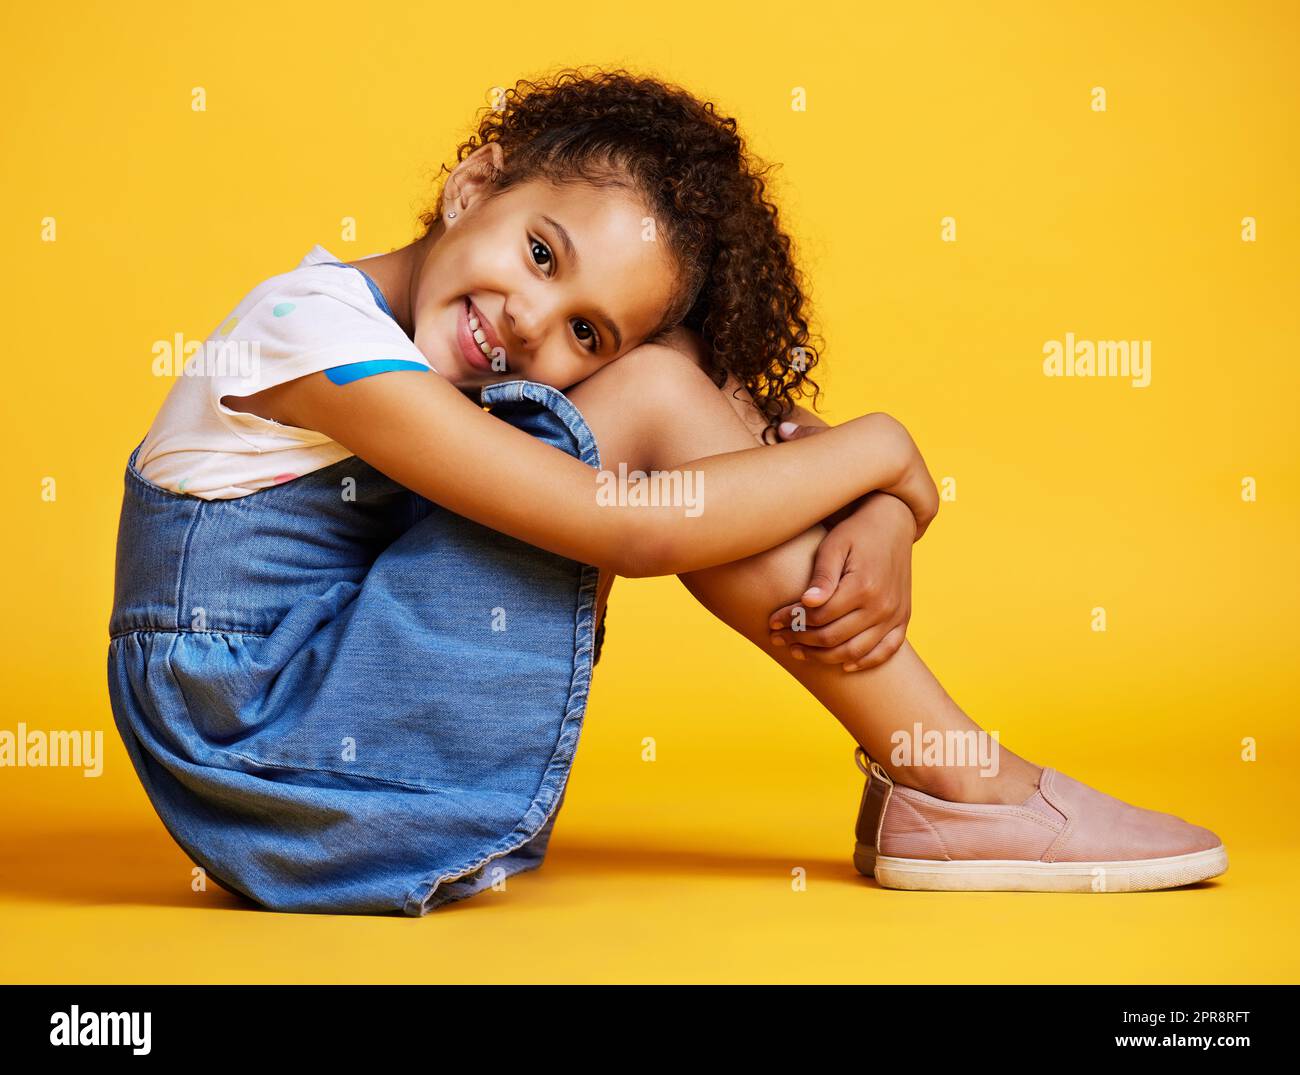 Studio portrait mixed race girl looking sitting alone isolated against a yellow background. Cute hispanic child posing inside. Happy and cute kid smiling and looking carefree in casual clothes Stock Photo